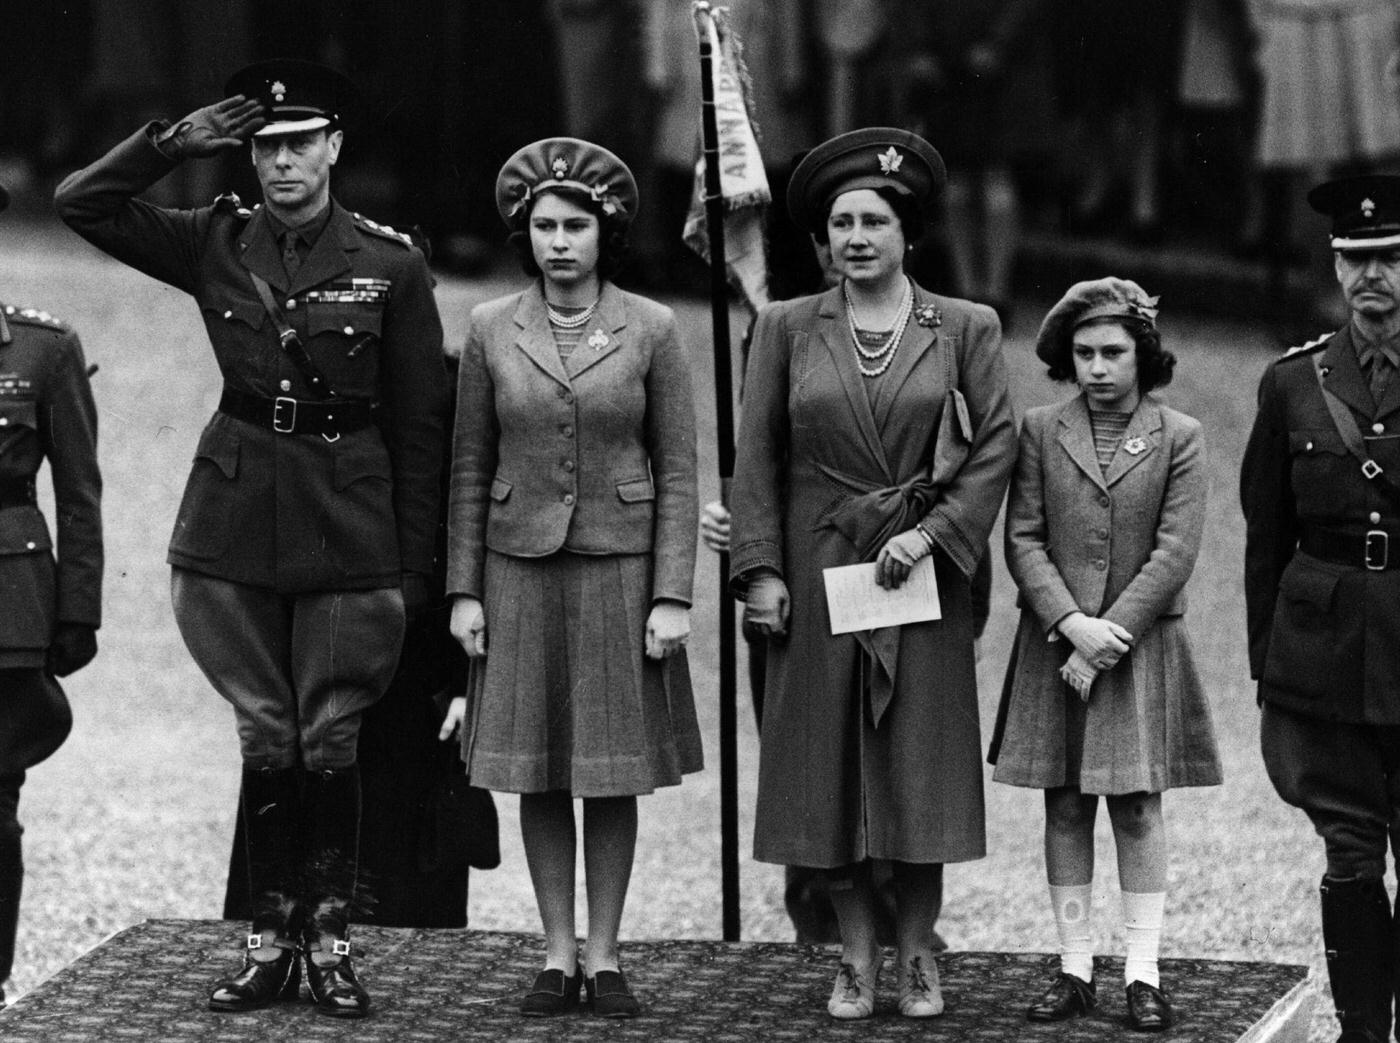 Queen Elizabeth, Princess Elizabeth and Princess Margaret inspecting the Grenadier Guards (who are not visible) on Princess Elizabeth's 16th birthday.